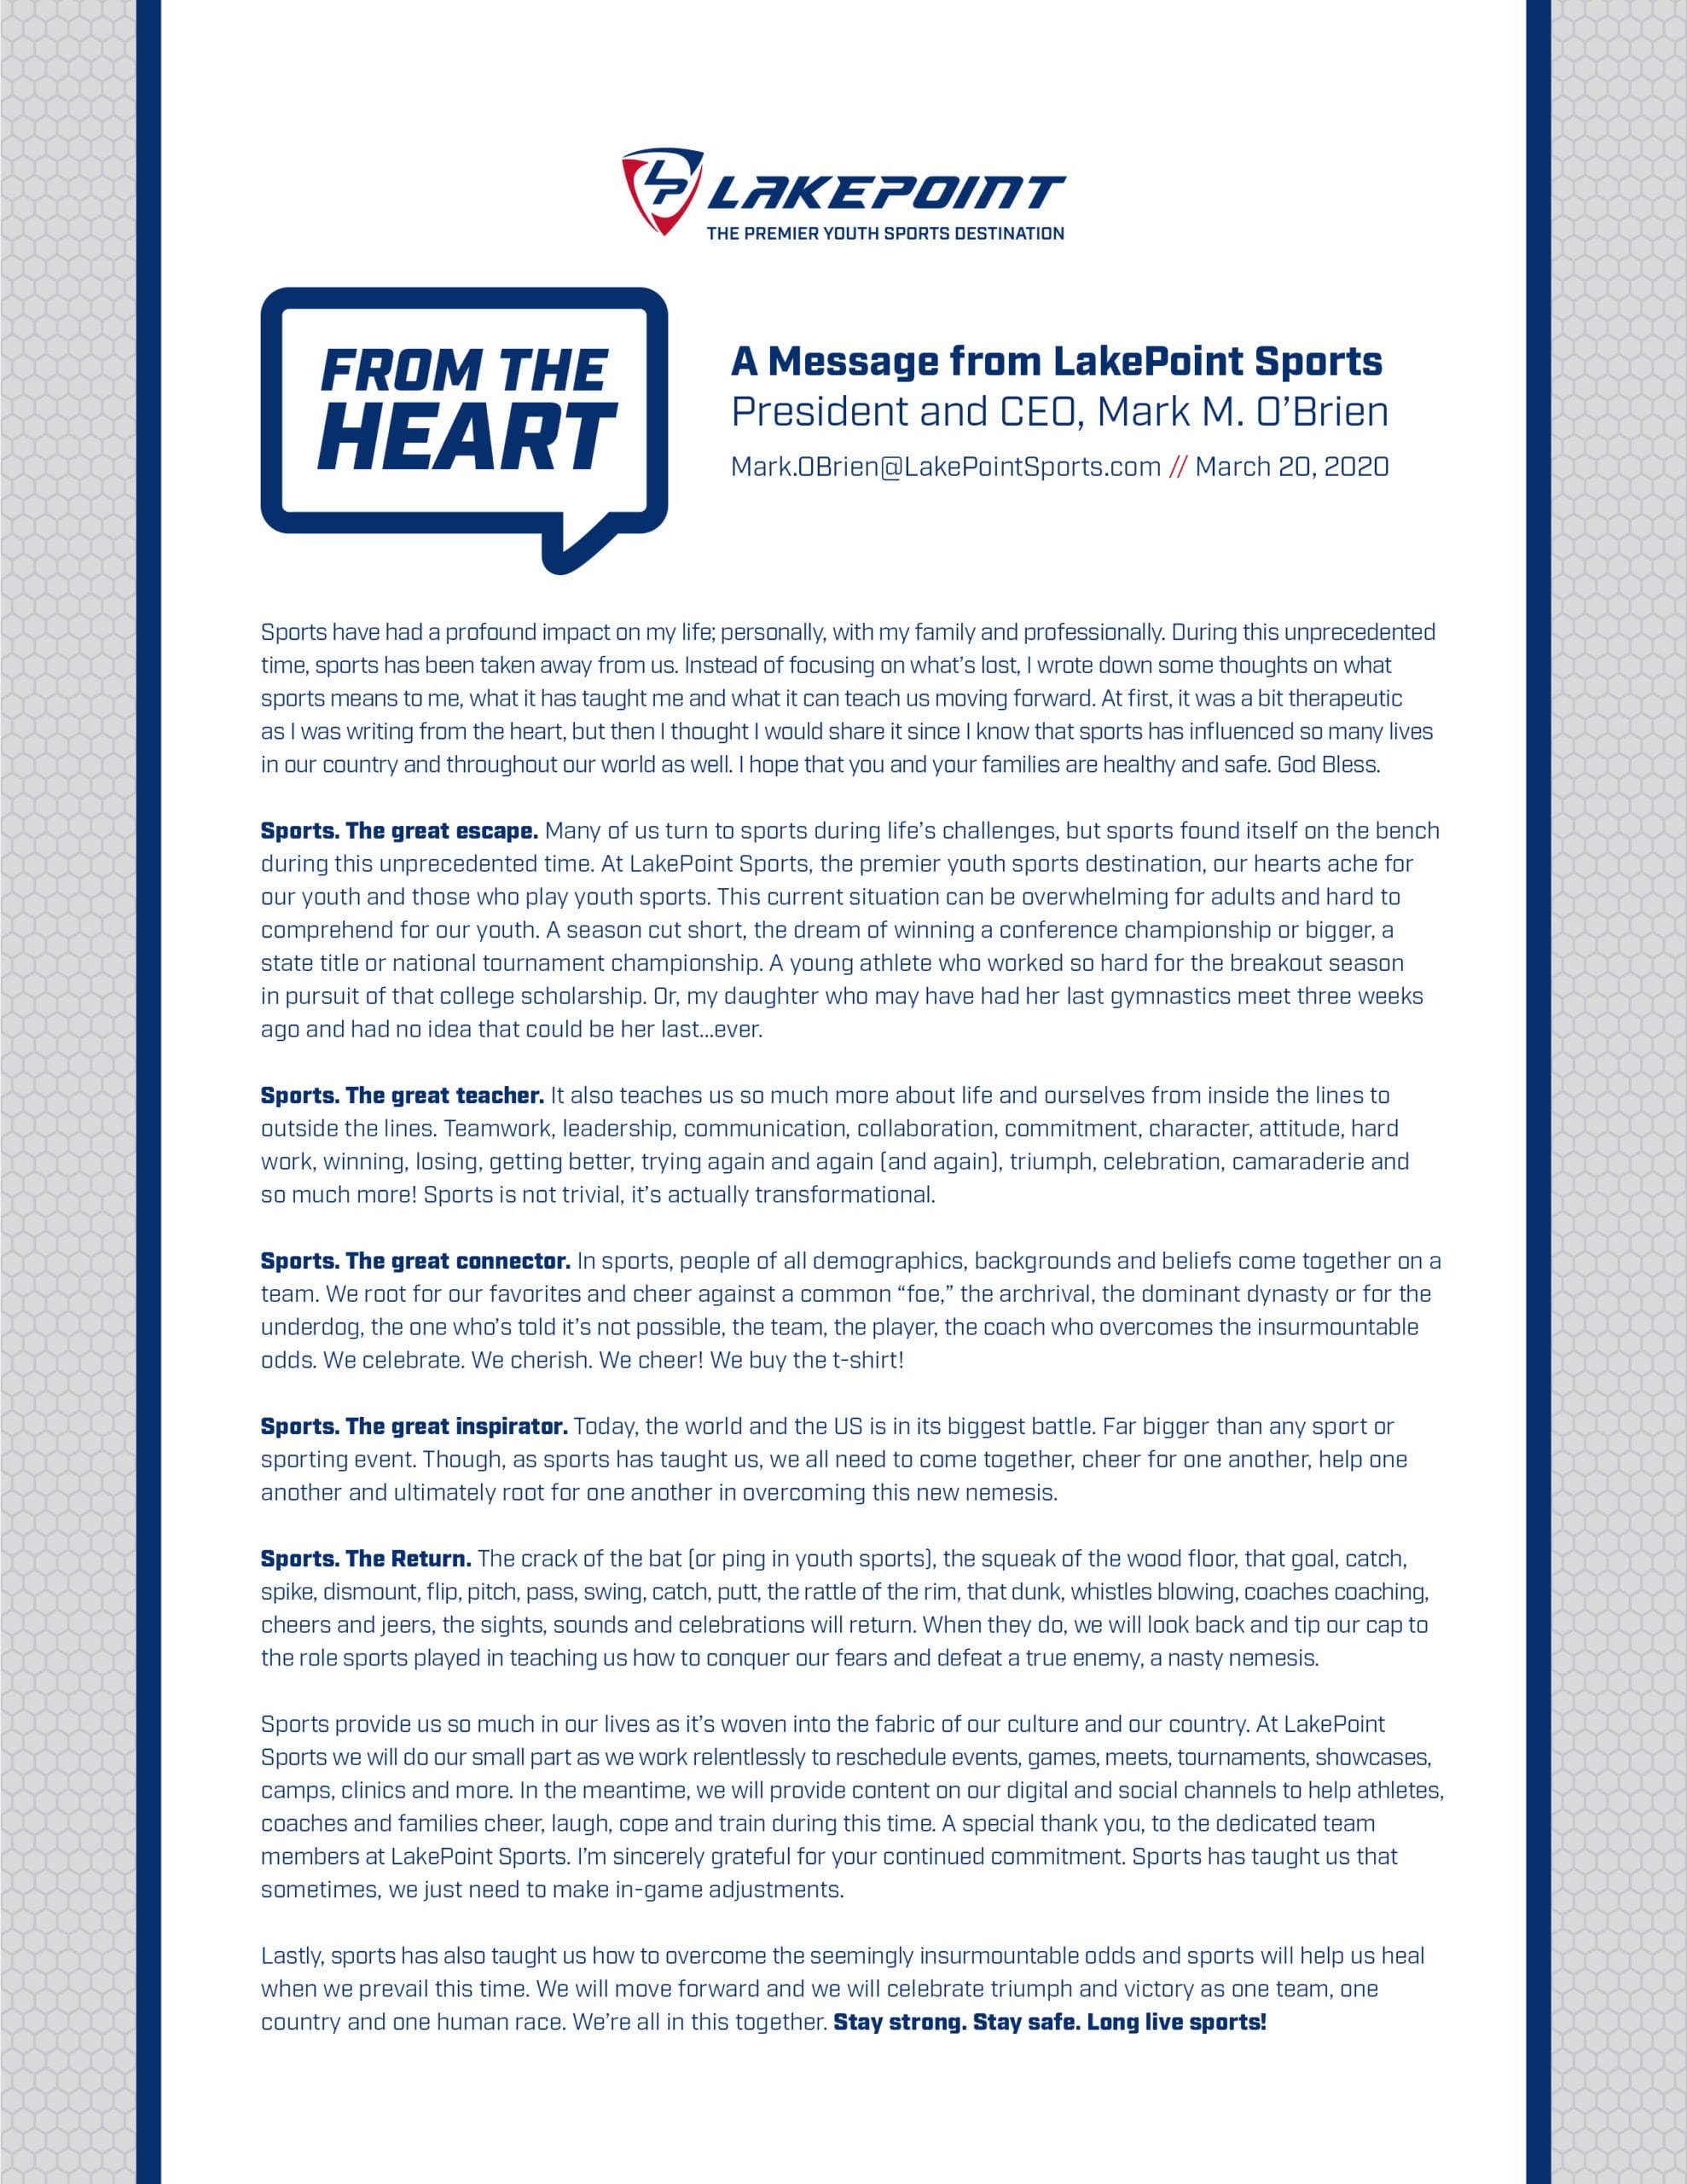 From-the-Heart_LakePoint-Sports_LI_letter-UPDATED